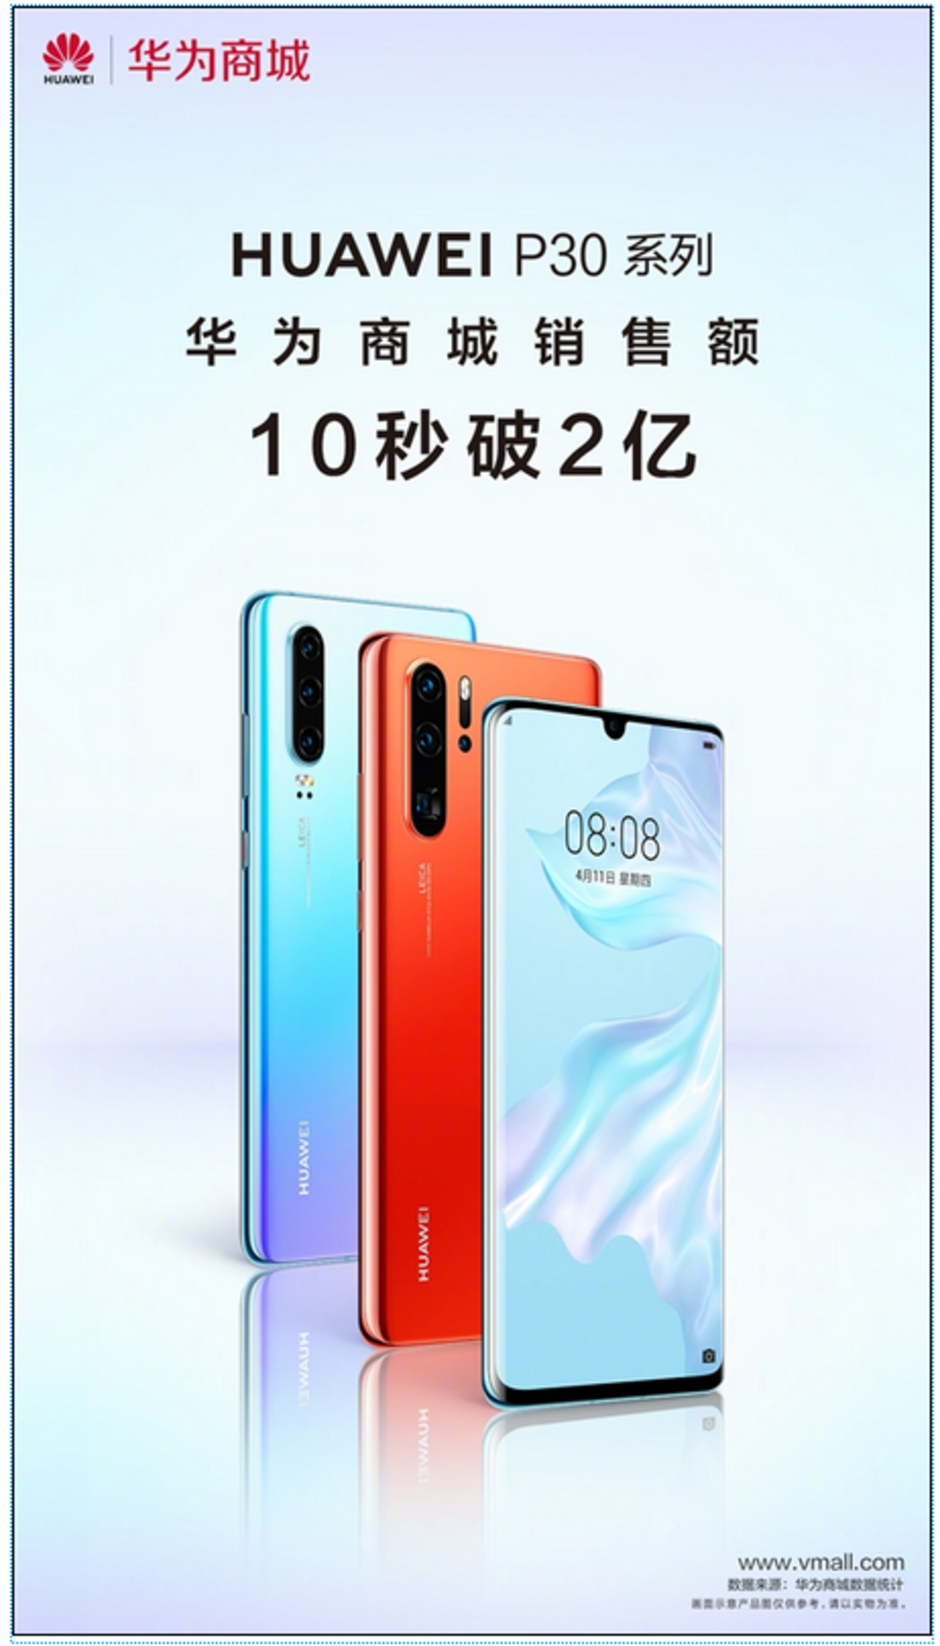 Huawei&#039;s flash sale for P30 pre-orders sold out in 10 seconds today - Huawei P30 and P30 Pro sell out pre-order flash sale in 10 seconds